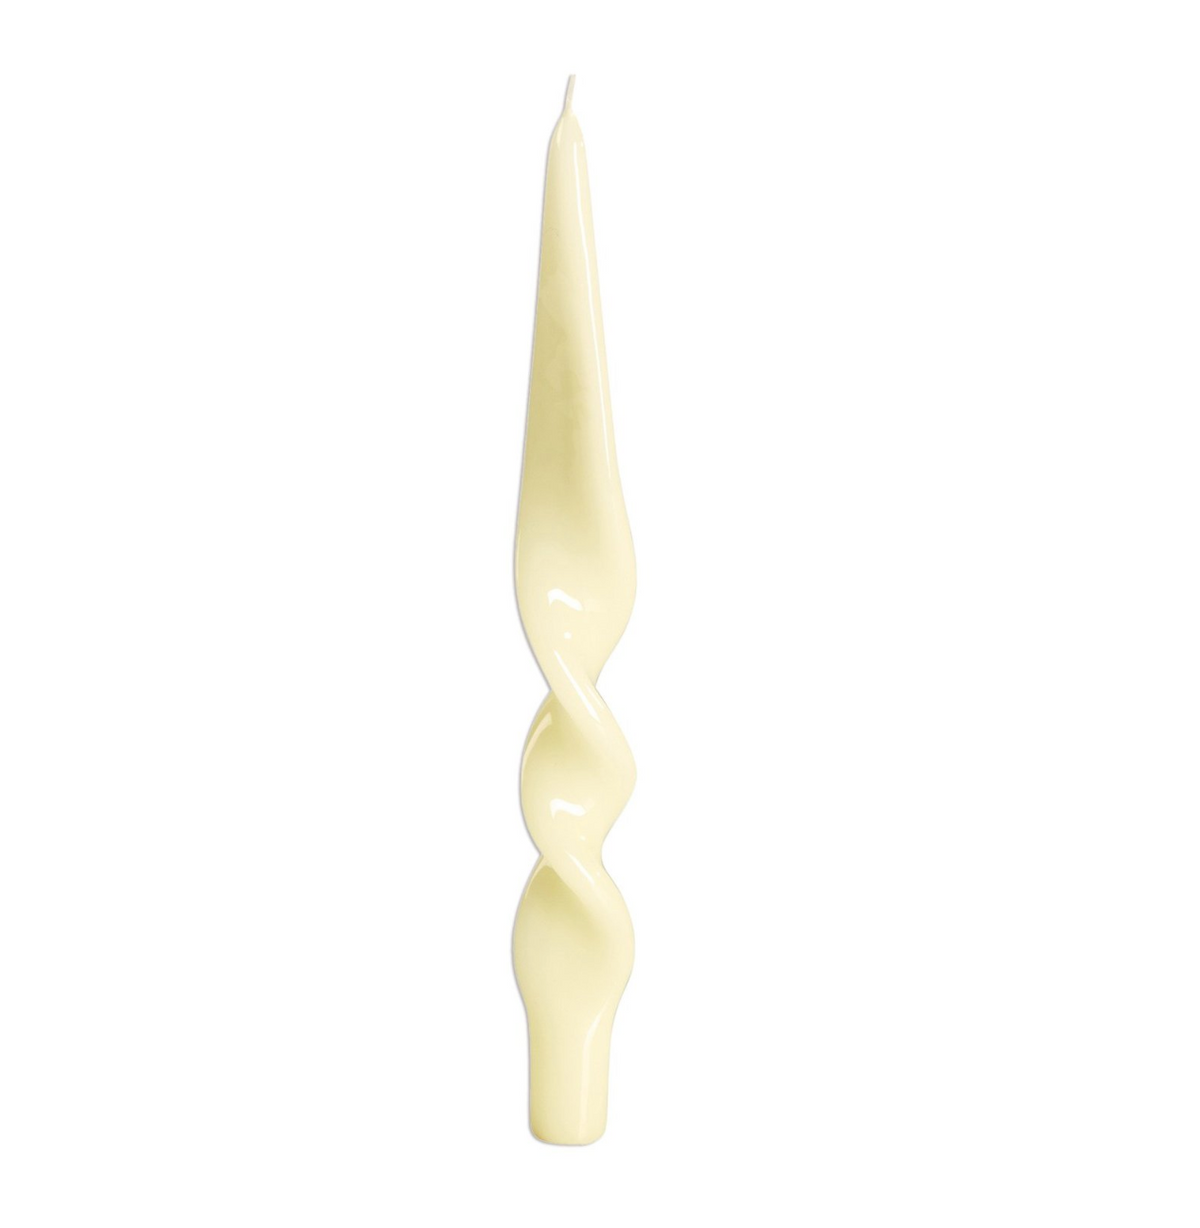 TWISTED CANDLE / CREAM